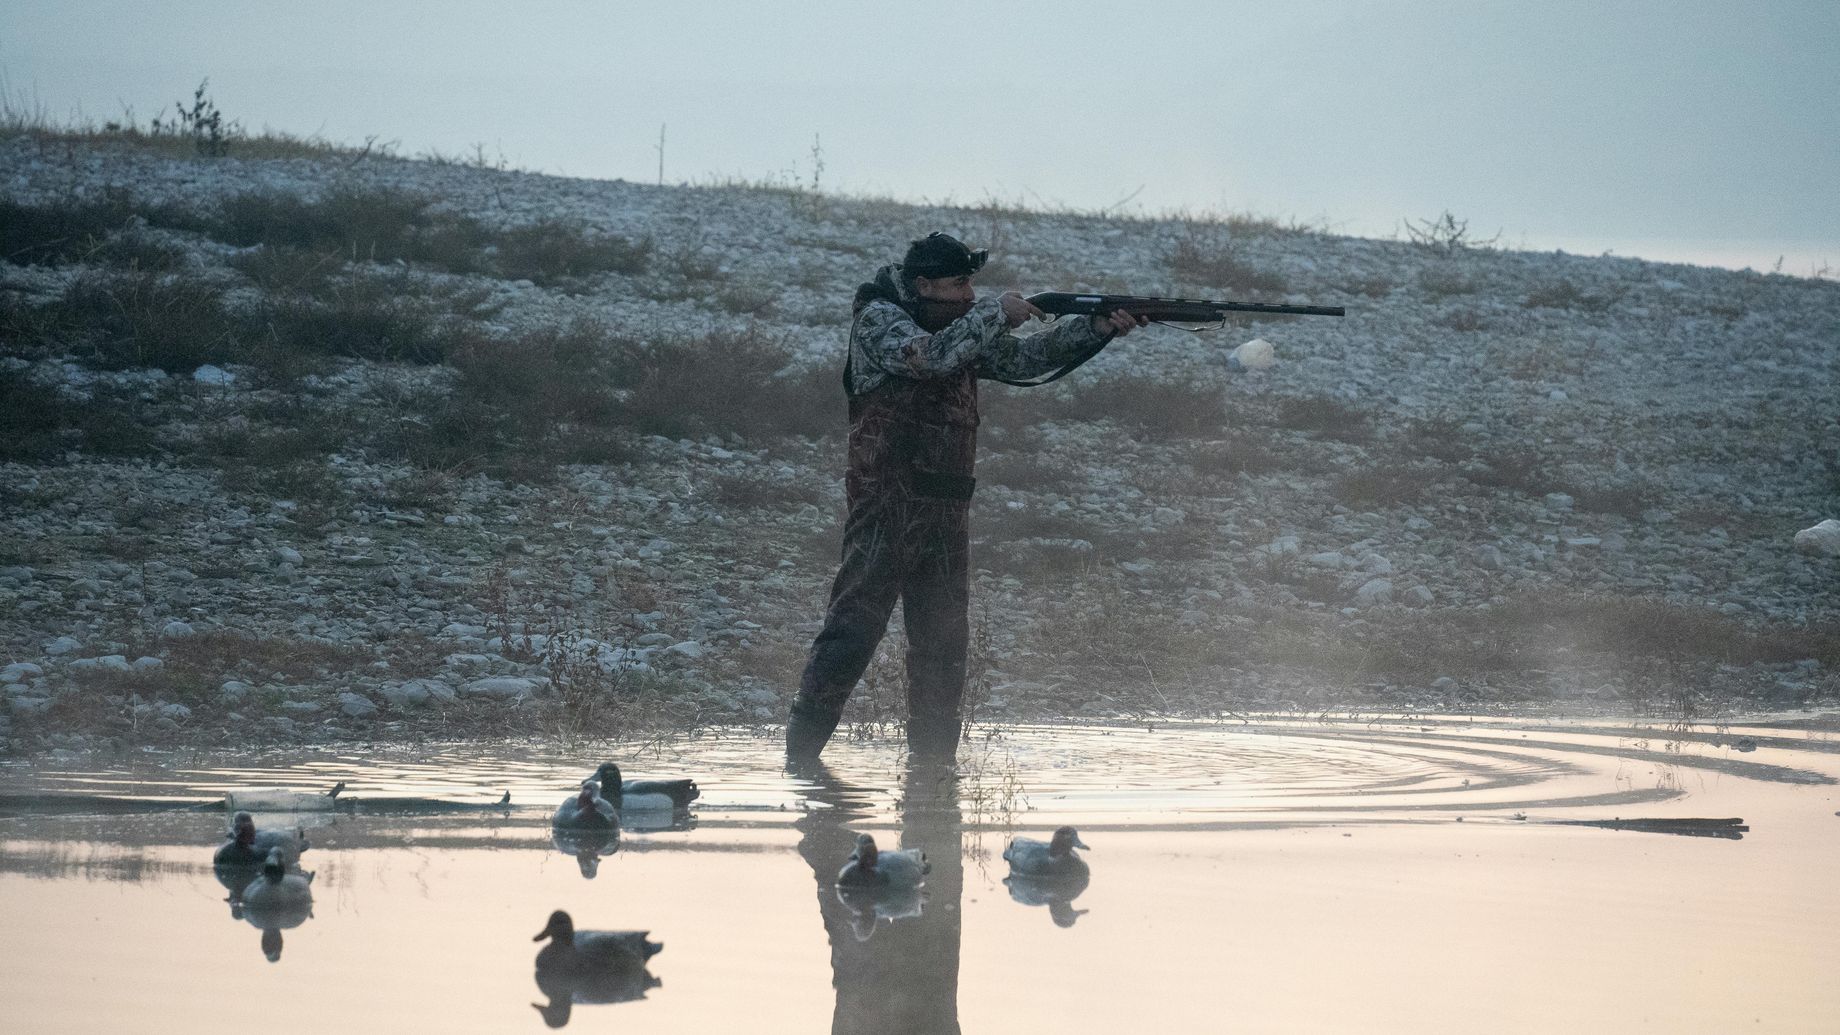 Man Wearing Camouflage Clothing Hunting with a Rifle, and Ducks on a Pond